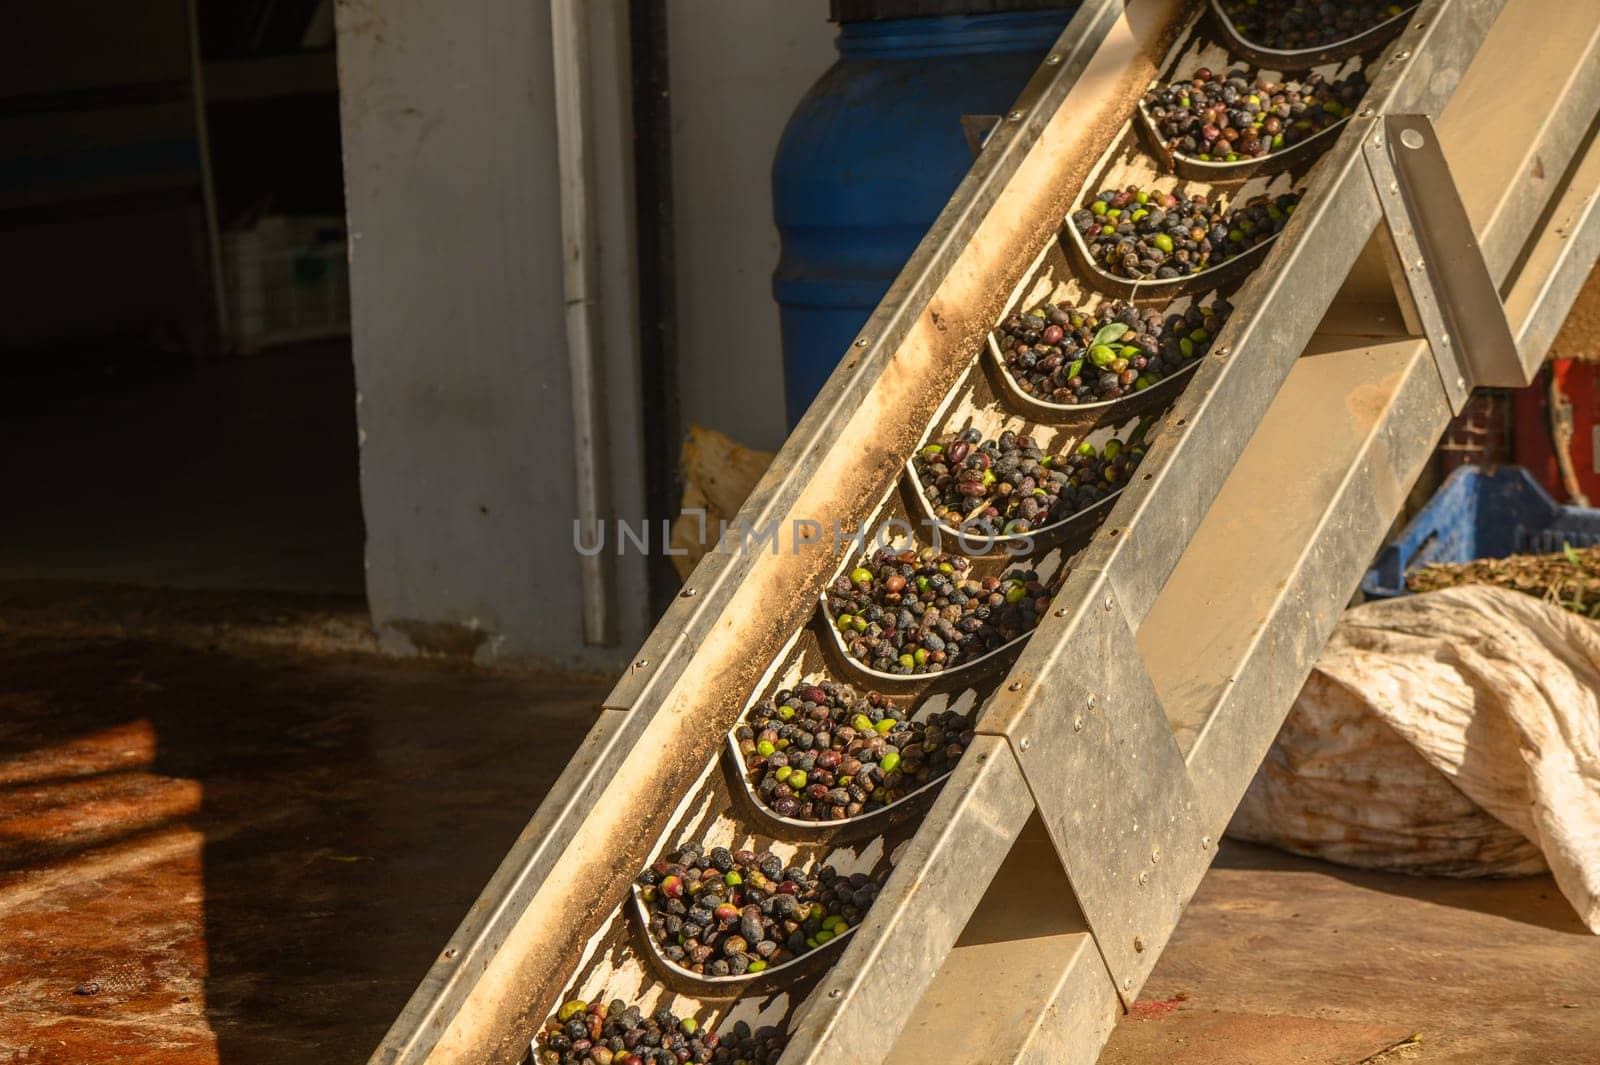 olives are transported from a bunker to an olive oil pressing plant 4